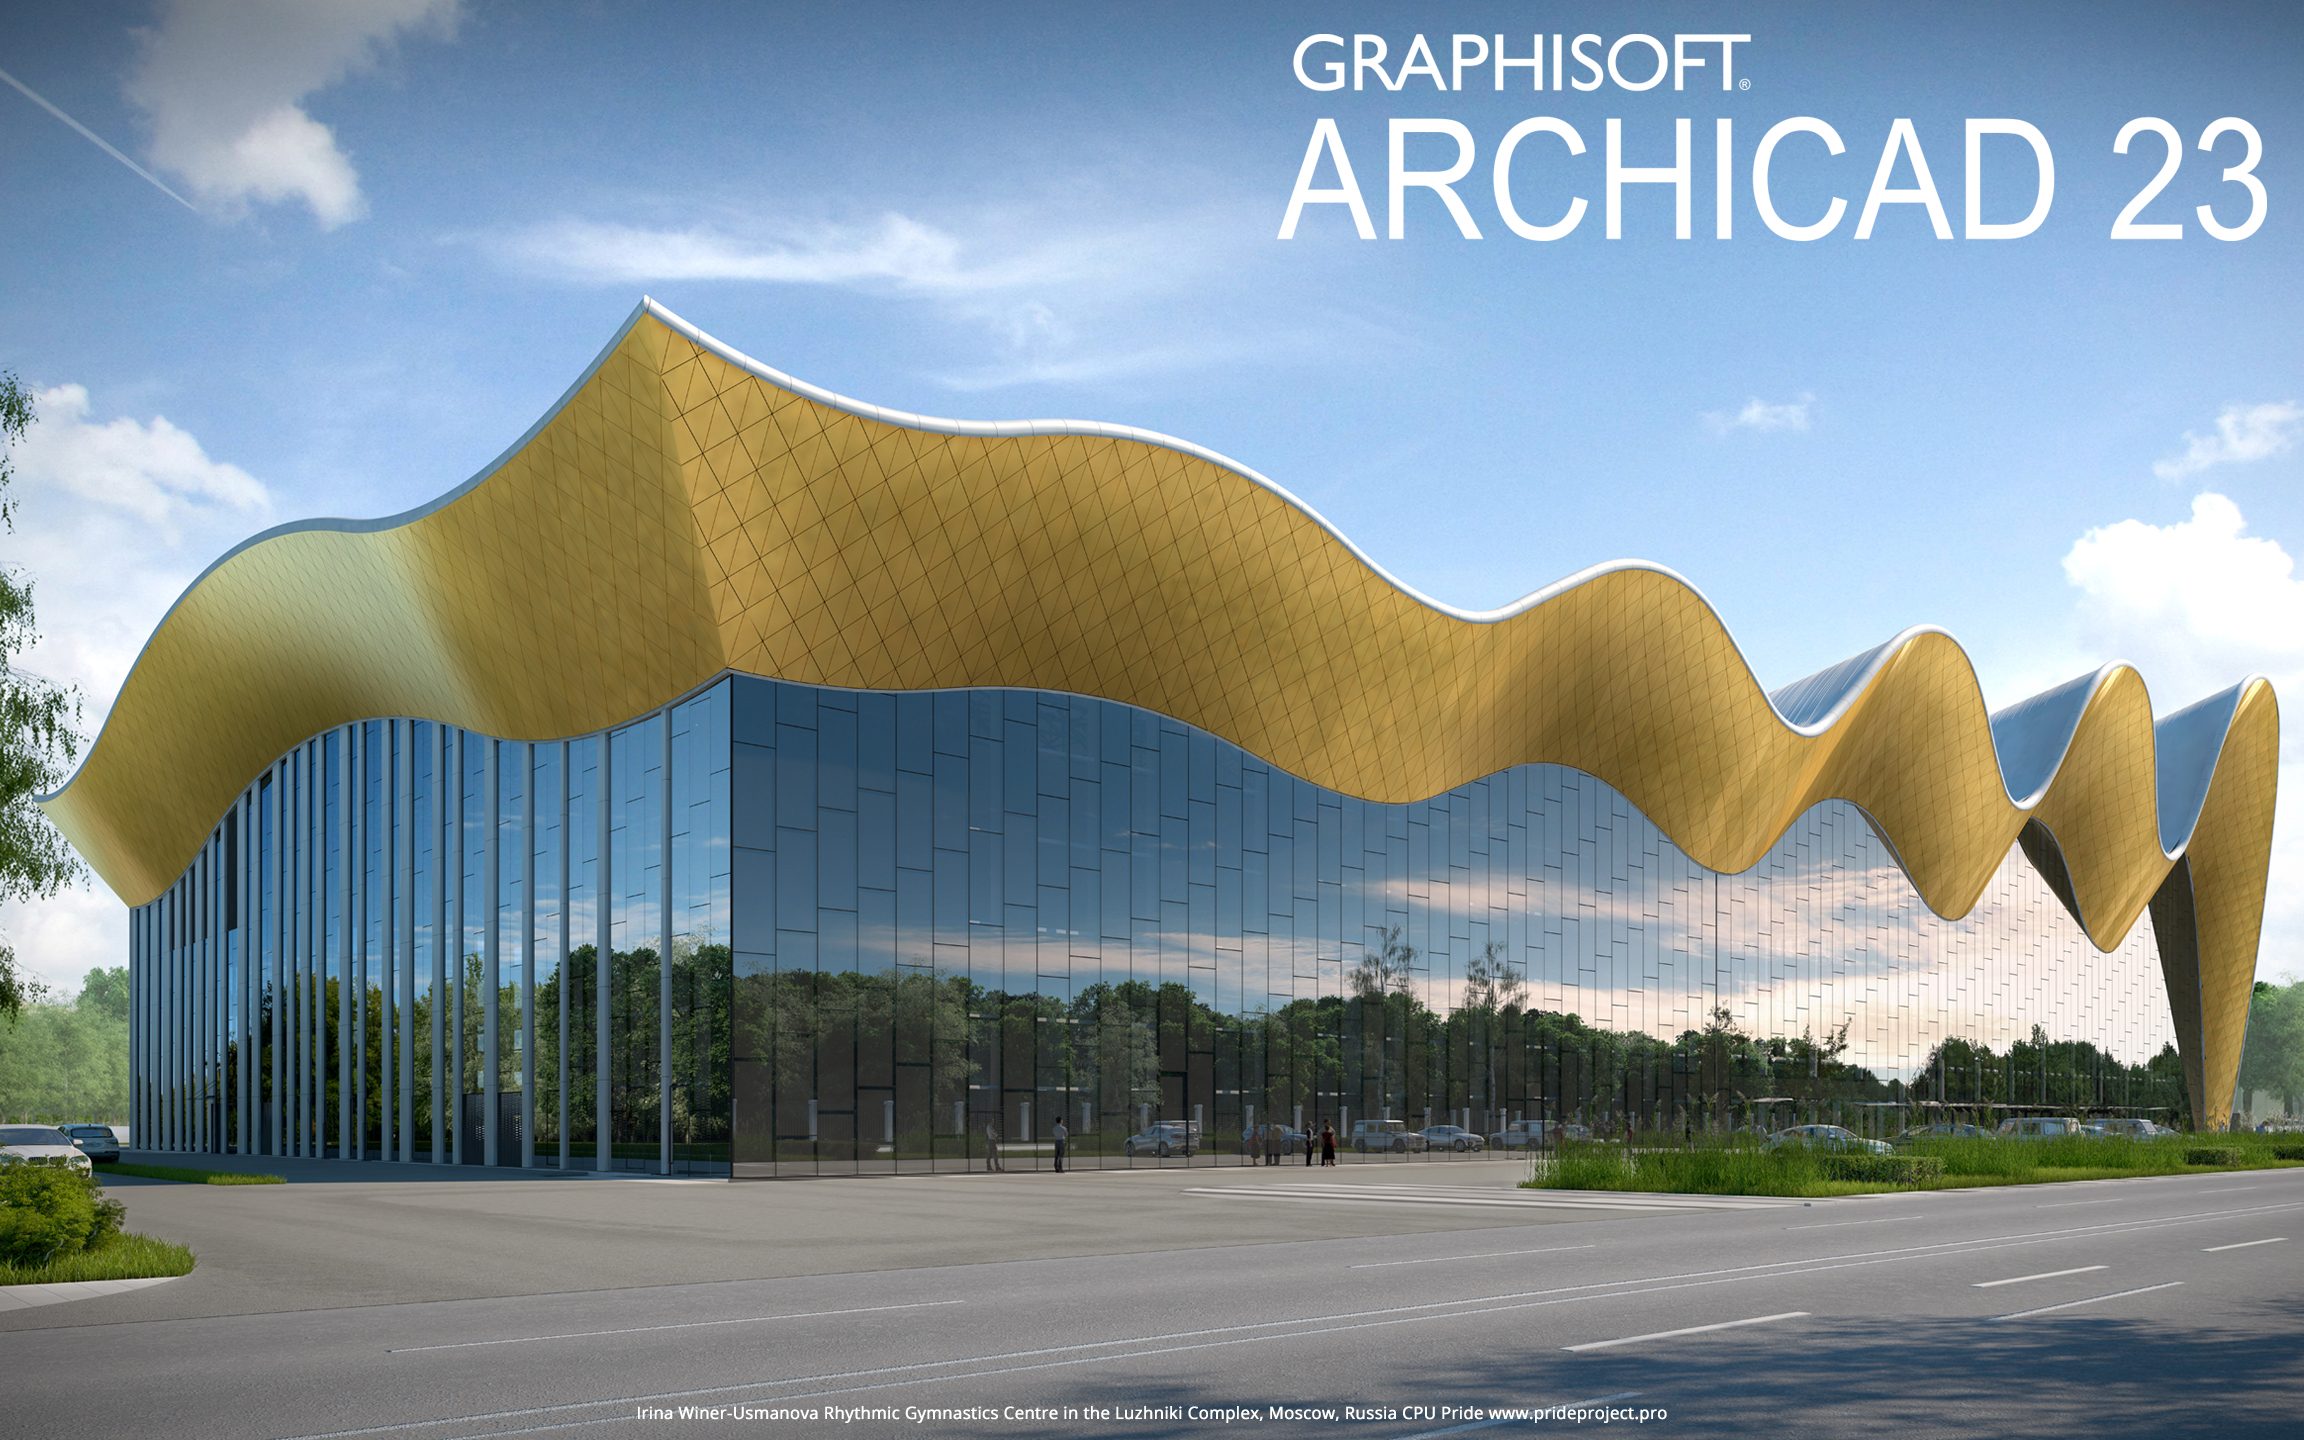 23 days of Archicad 23: Improved Rendering and Surfaces